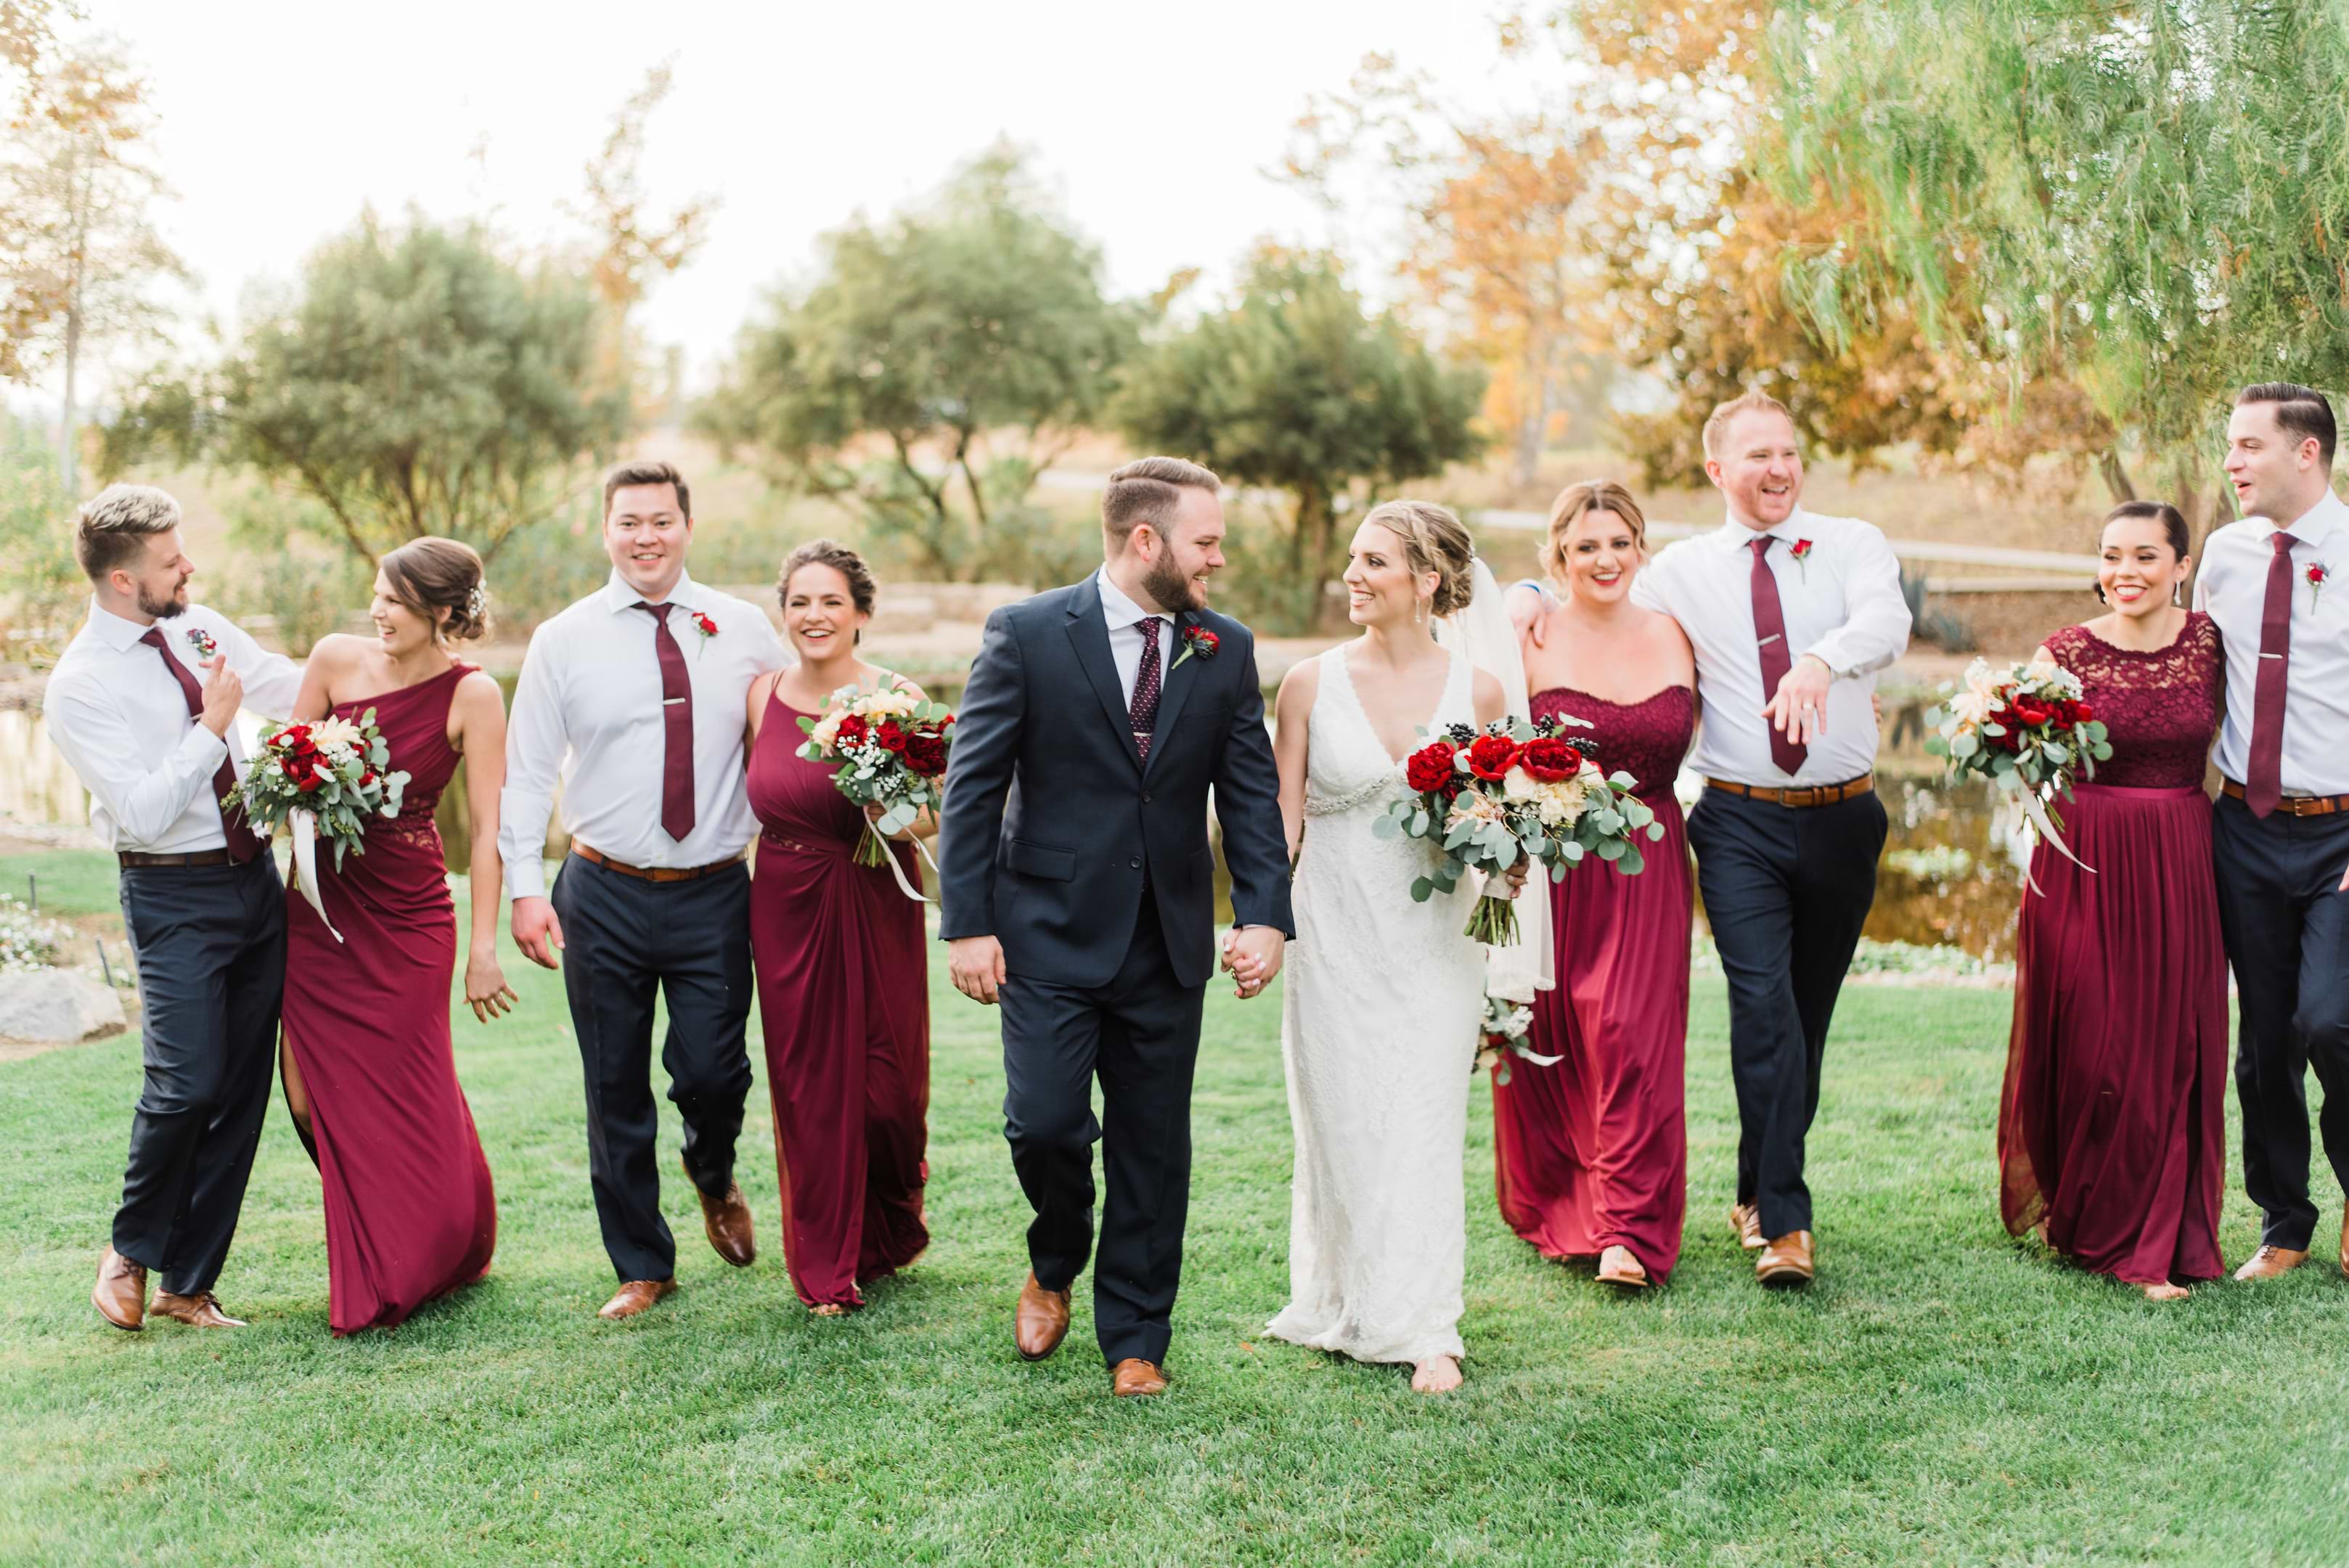 Wedding Party Poses | Photographer Collab